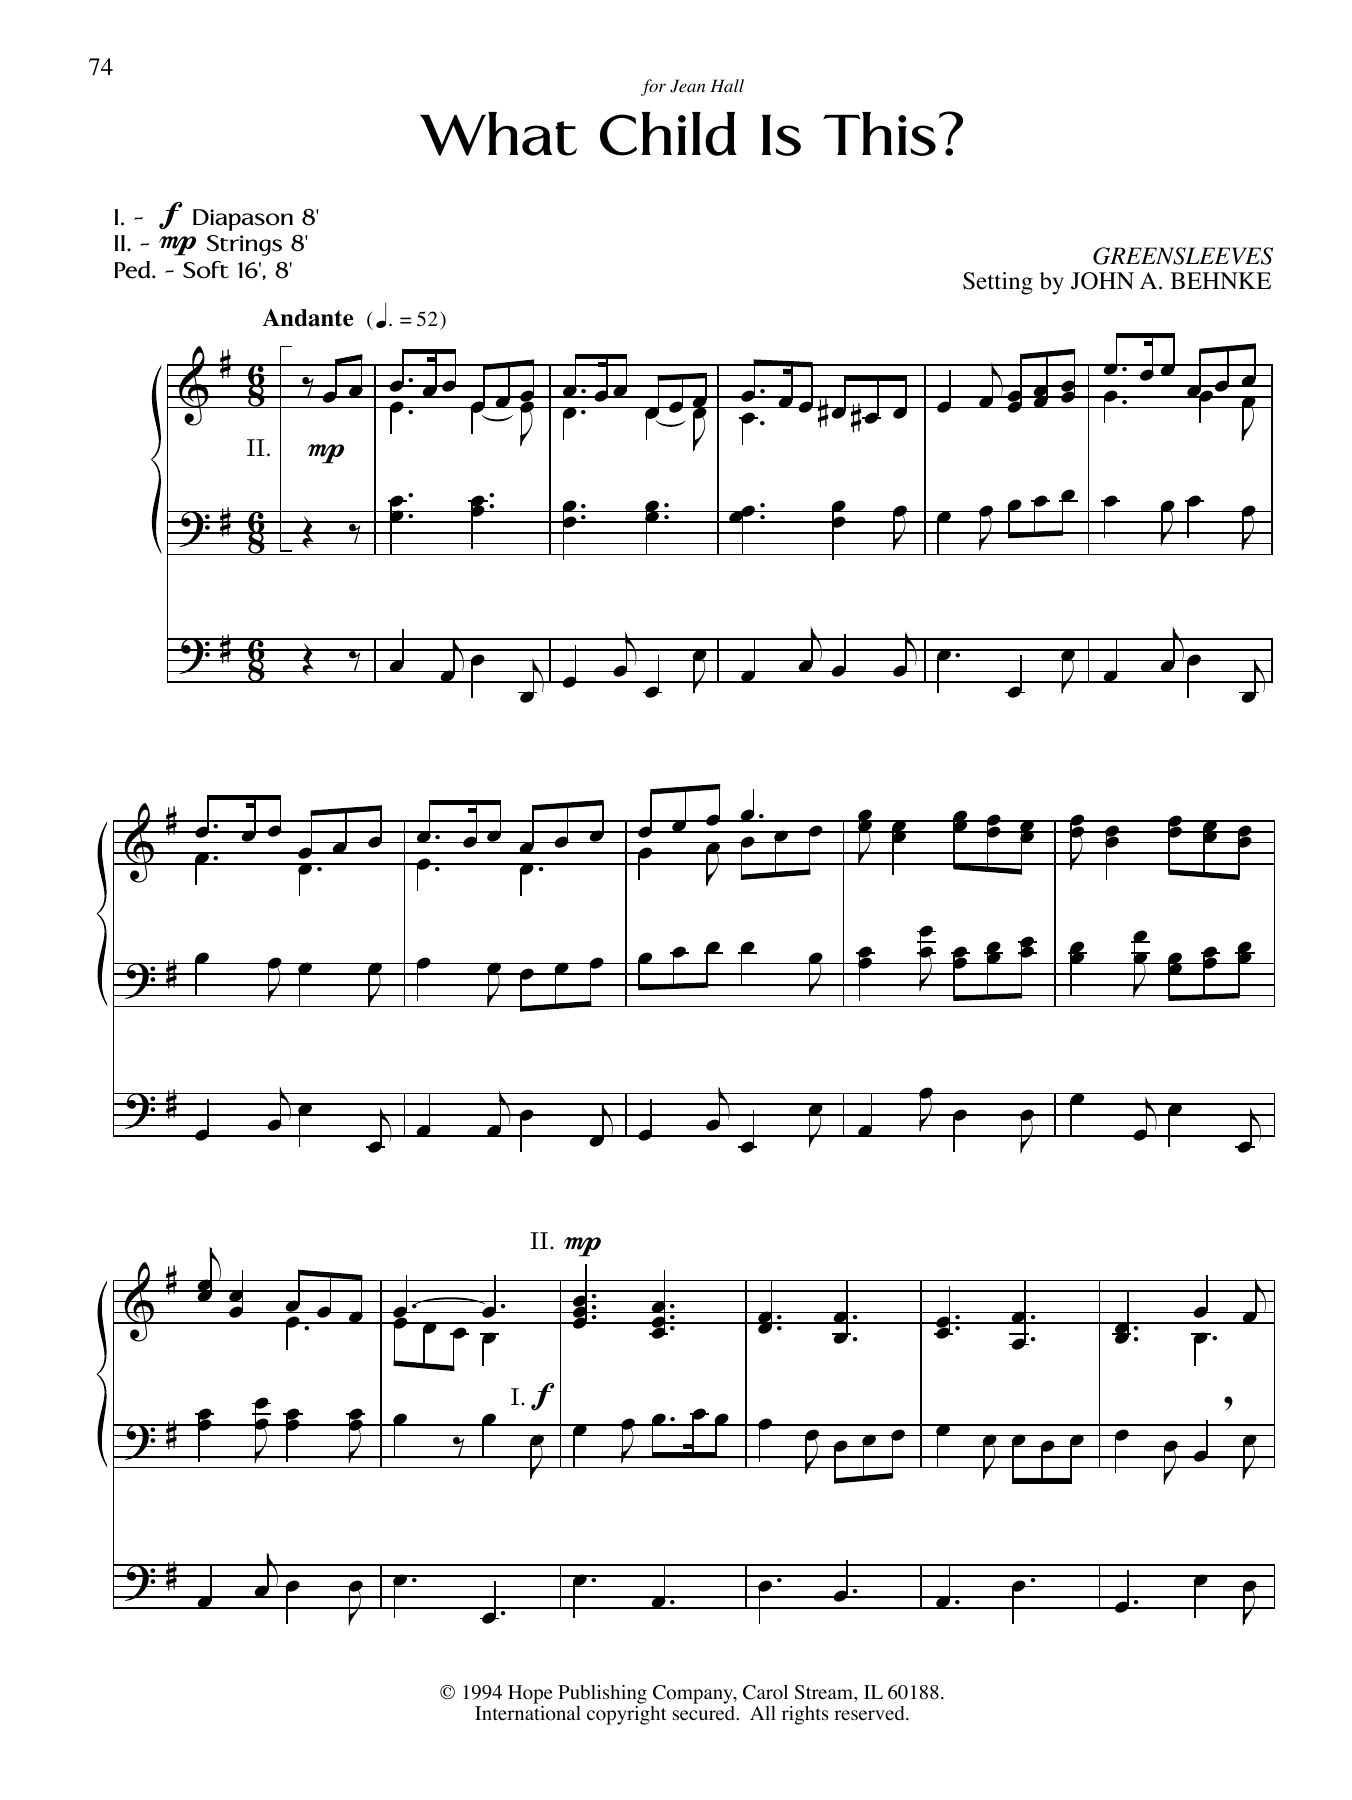 Download John A. Behnke What Child Is This? Sheet Music